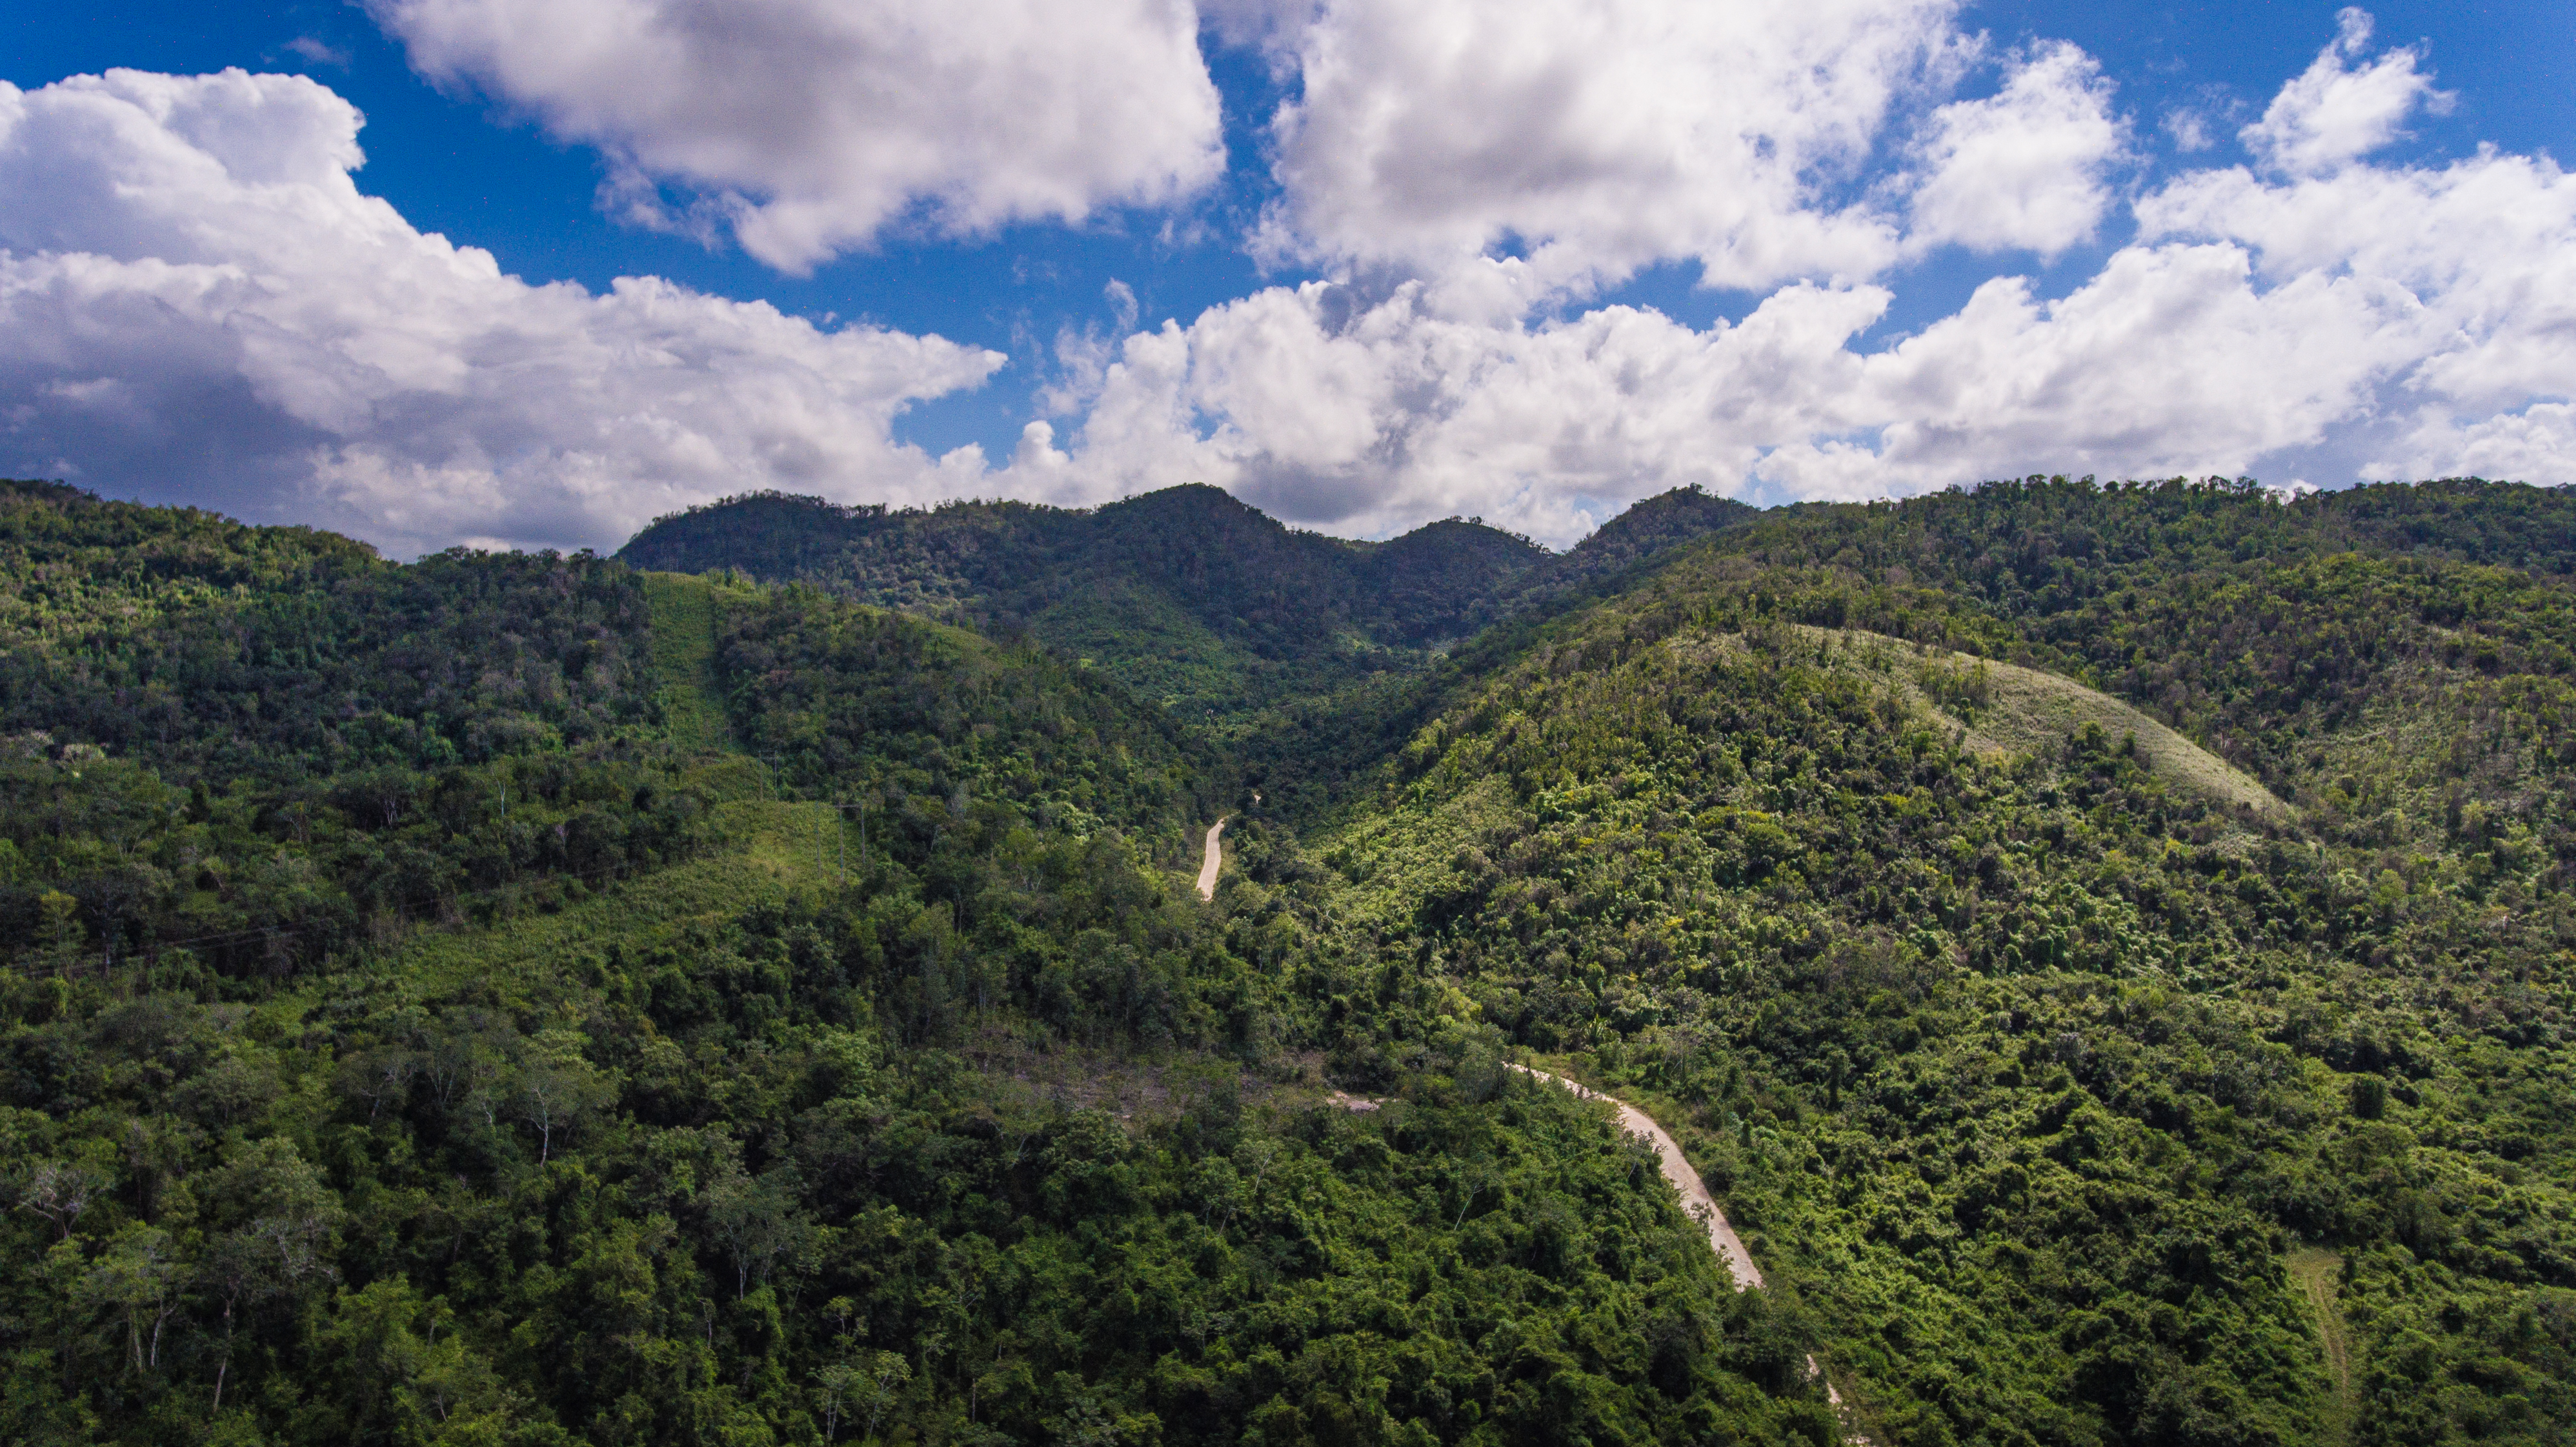 21 Latin American and Caribbean countries work together to harmonize National Forest Inventories